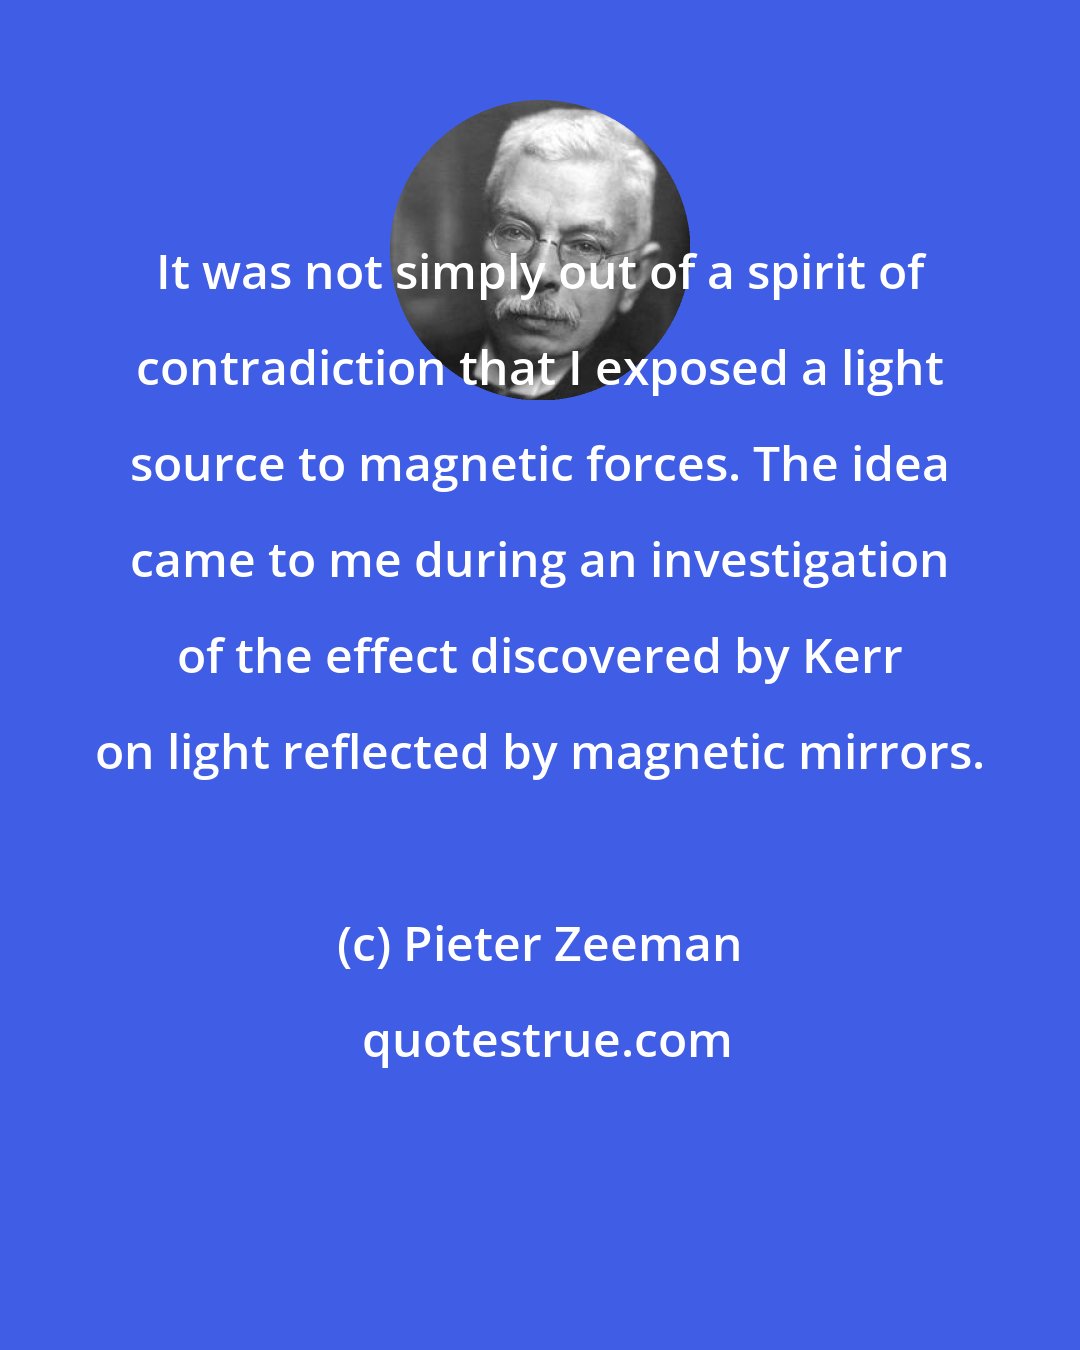 Pieter Zeeman: It was not simply out of a spirit of contradiction that I exposed a light source to magnetic forces. The idea came to me during an investigation of the effect discovered by Kerr on light reflected by magnetic mirrors.